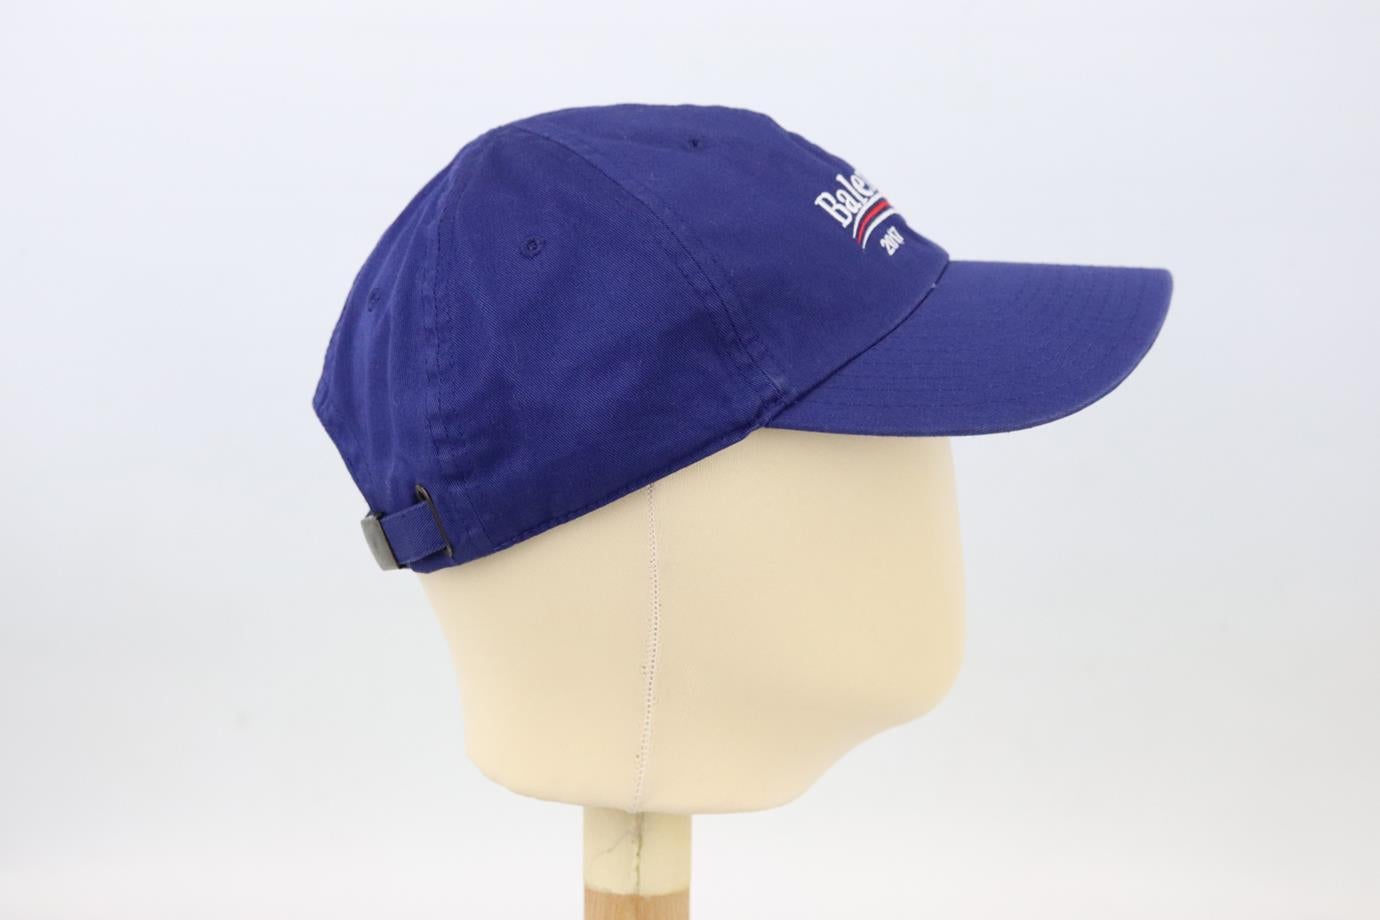 Balenciaga embroidered cotton twill baseball cap. Made from blue cotton-twill with white and red logo-embroidery on the front. Blue. Buckle fastening at back. 100% Cotton. Size: Large.  Brim Depth: 3 in. Circumference: 21.4 in.